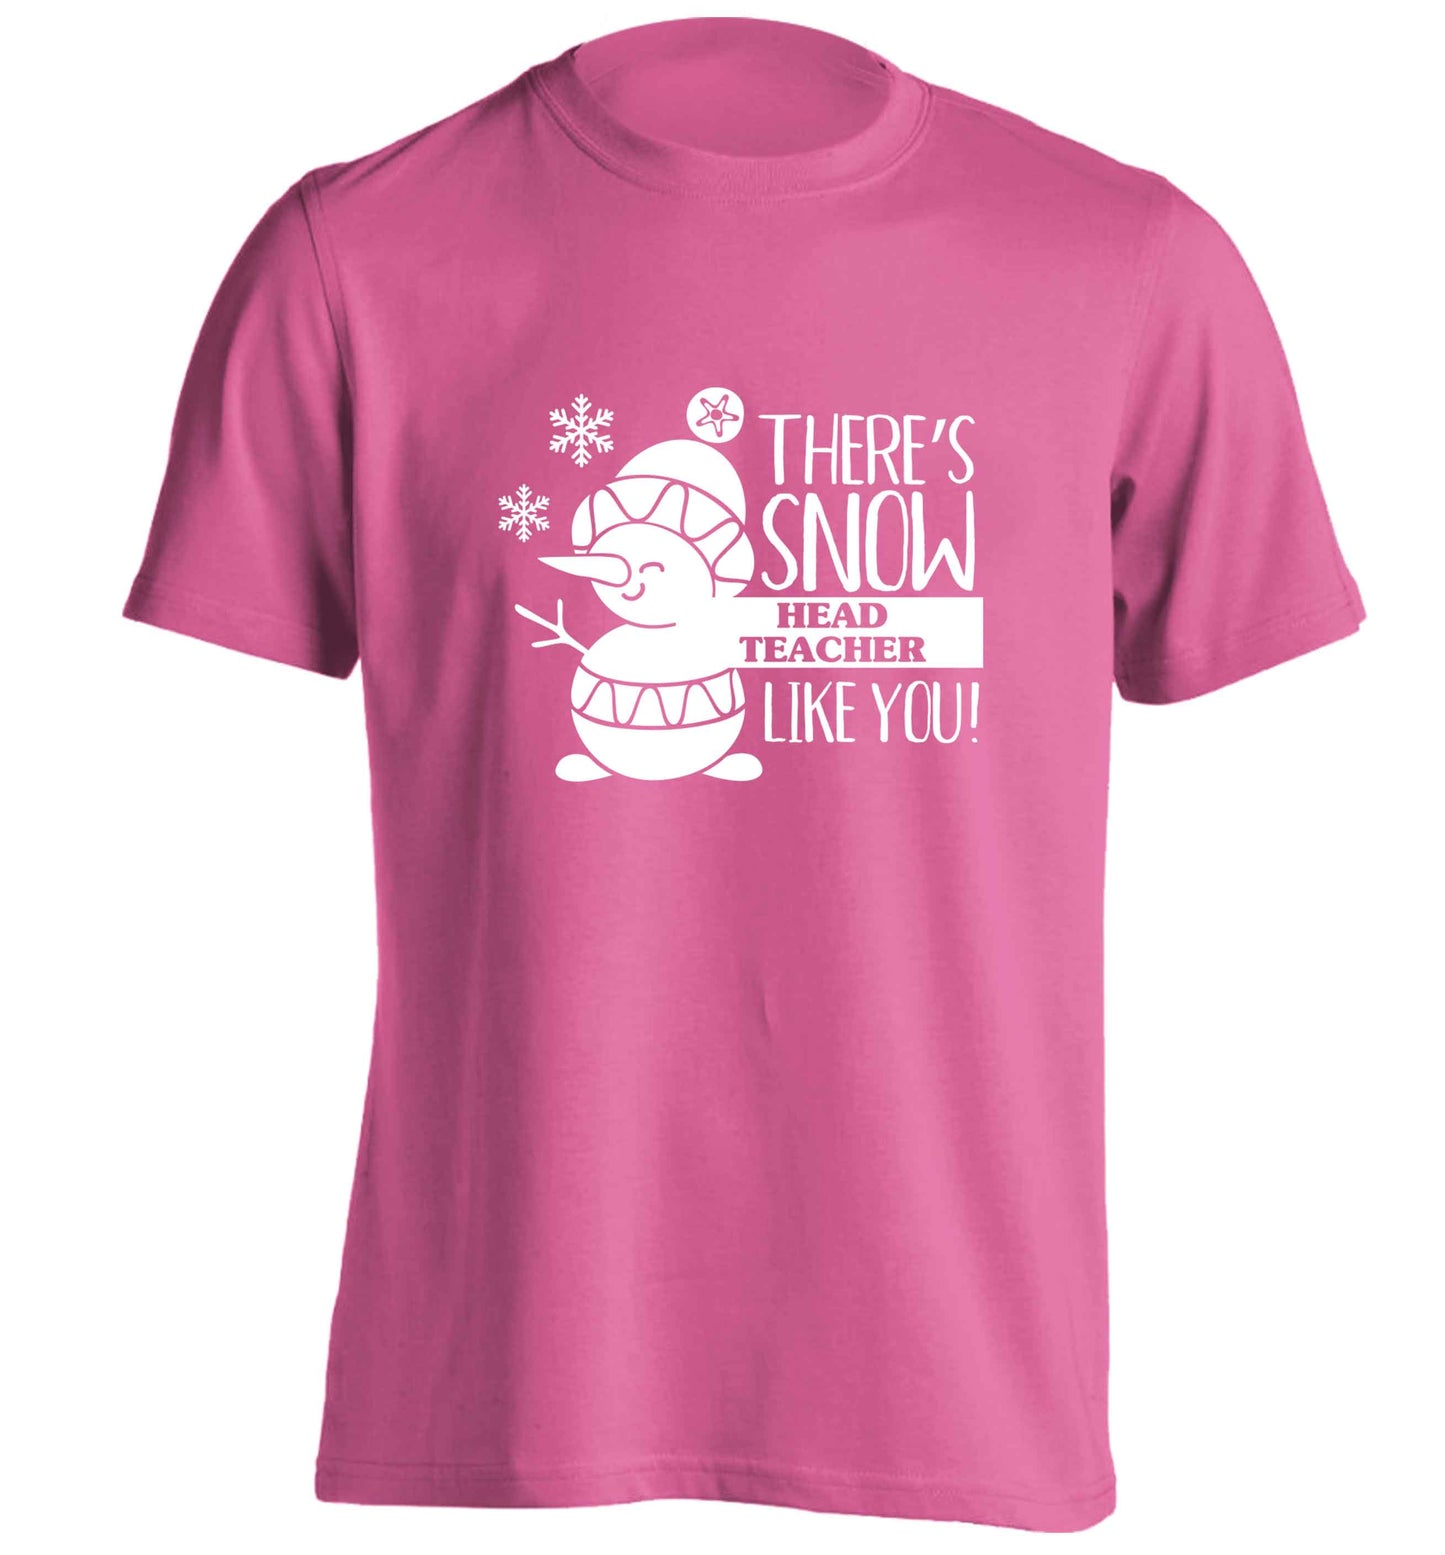 There's snow head teacher like you adults unisex pink Tshirt 2XL